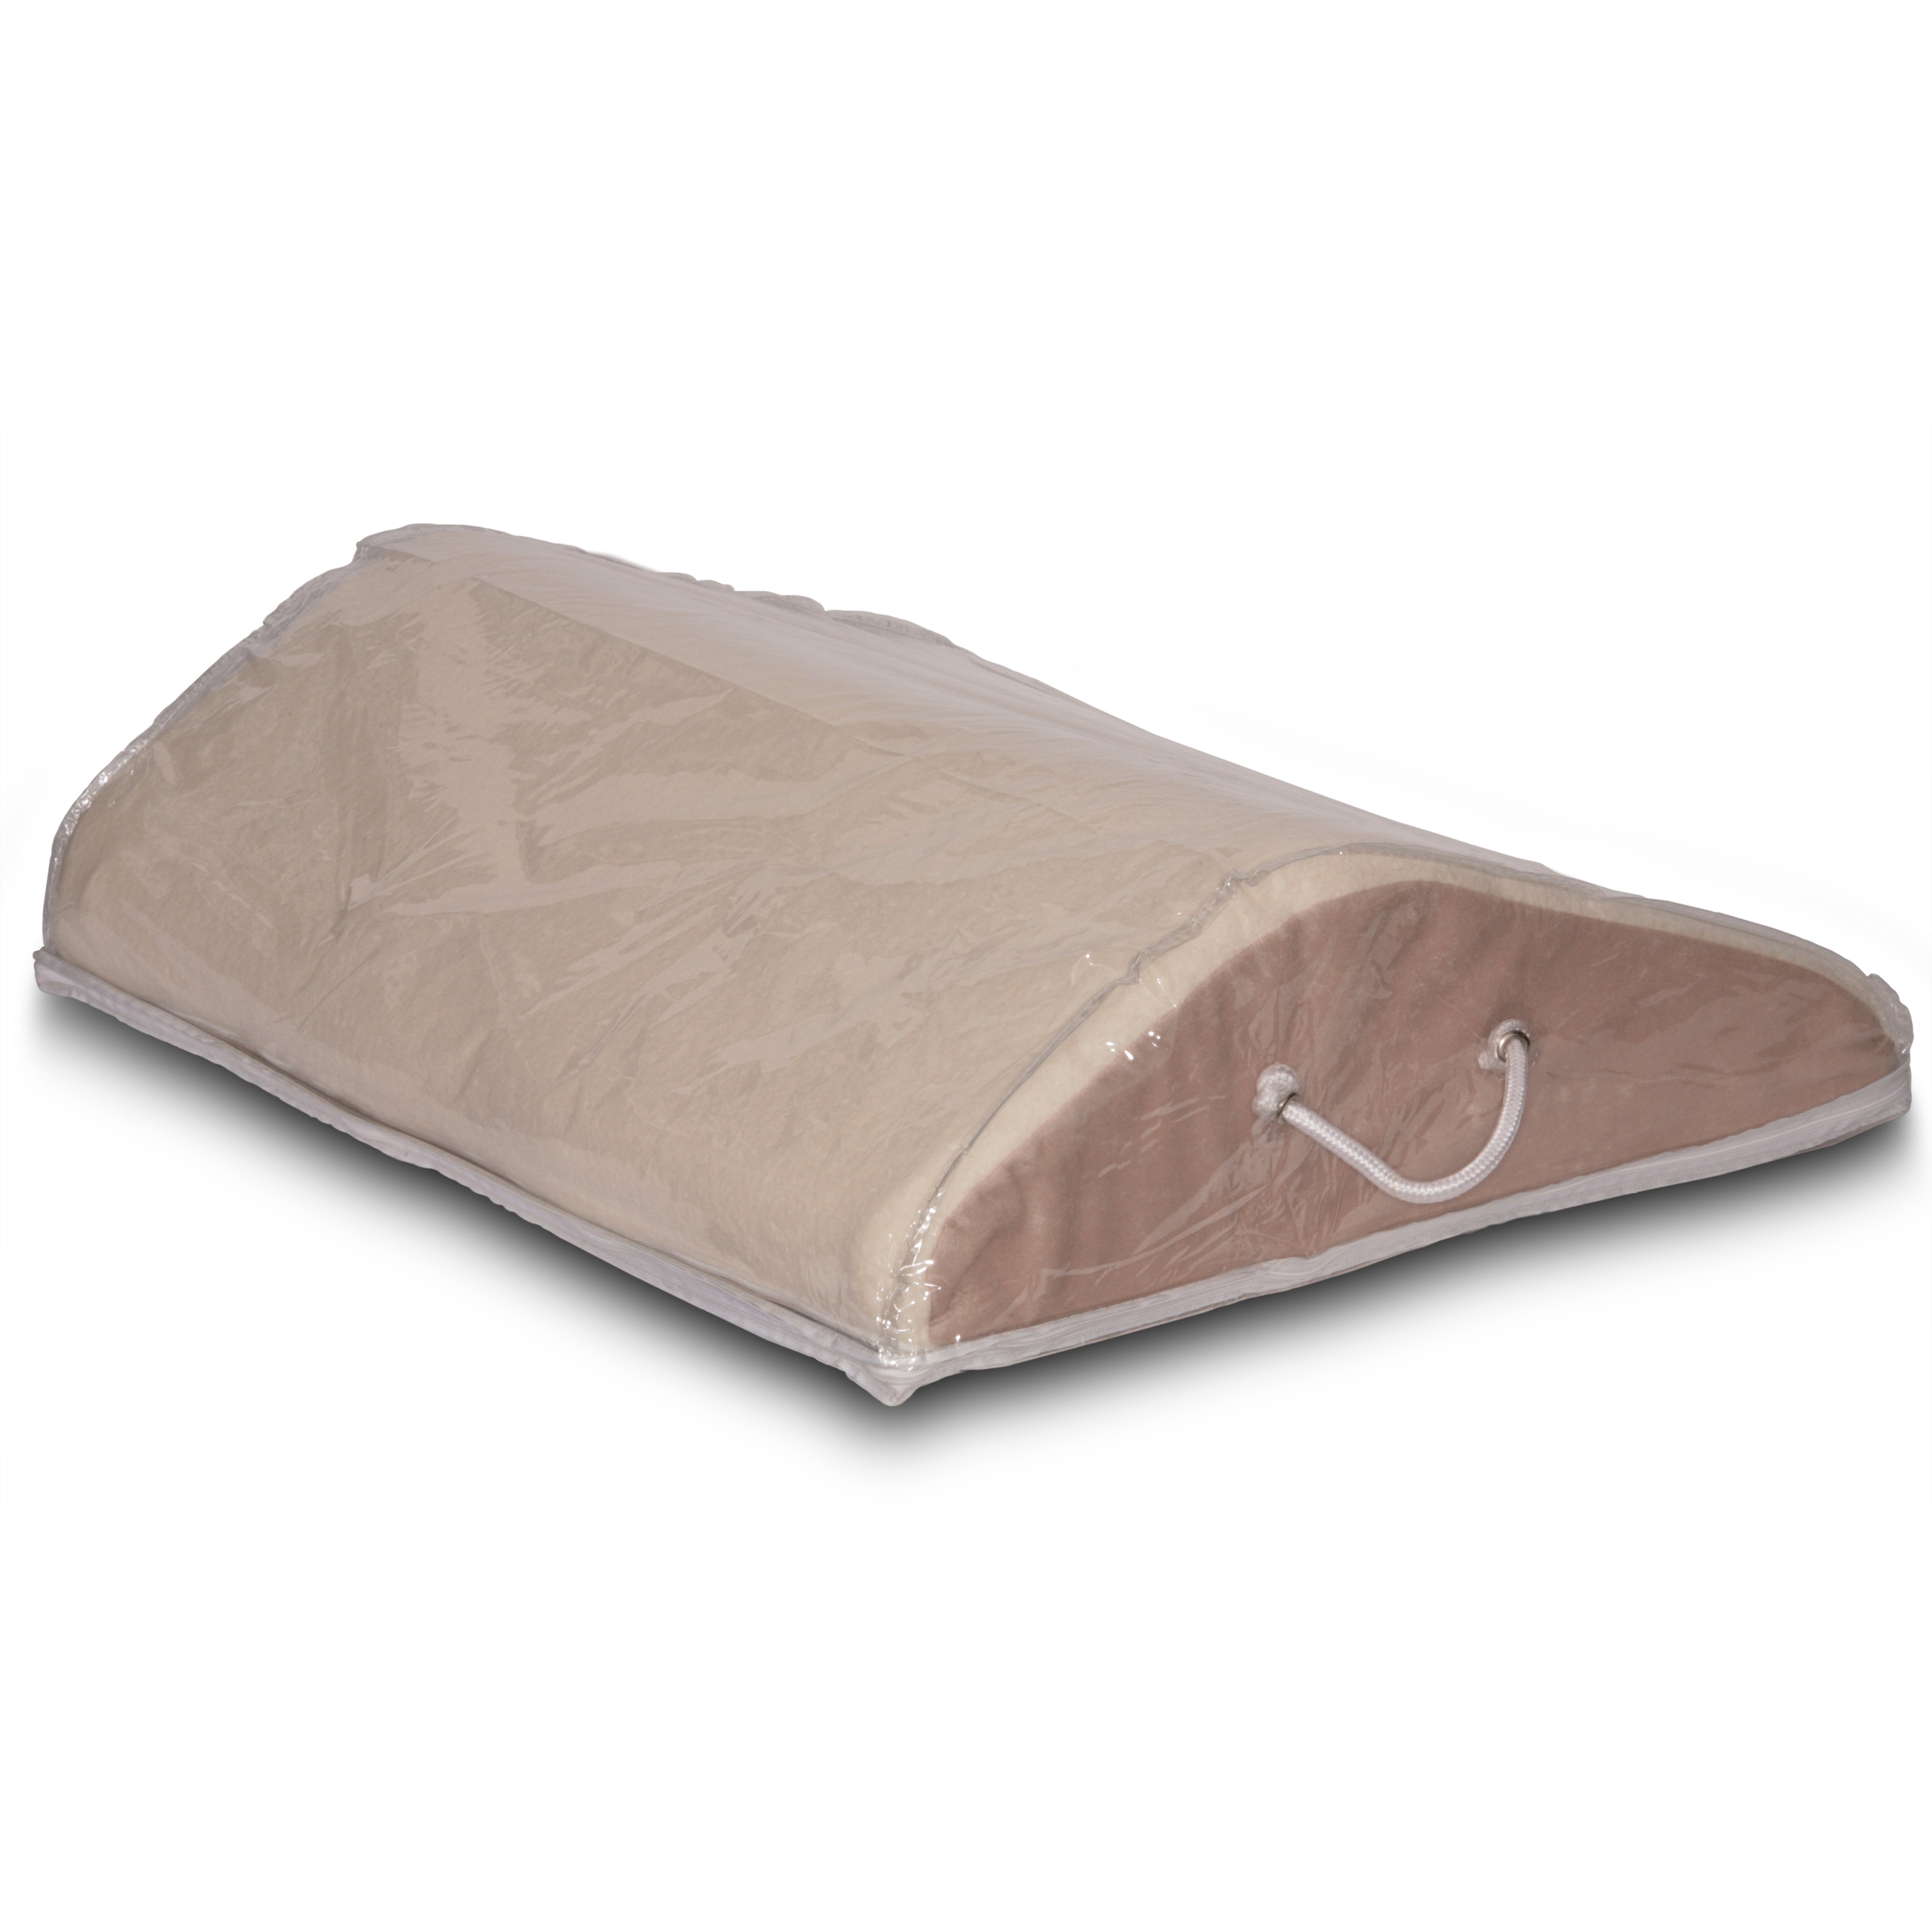 https://ak1.ostkcdn.com/images/products/12027424/Sloped-Knee-Lift-Foam-Pillow-with-Sherpa-Cover-4ac3ca2a-fc1c-4f5f-8170-fc67c5405eec.jpg